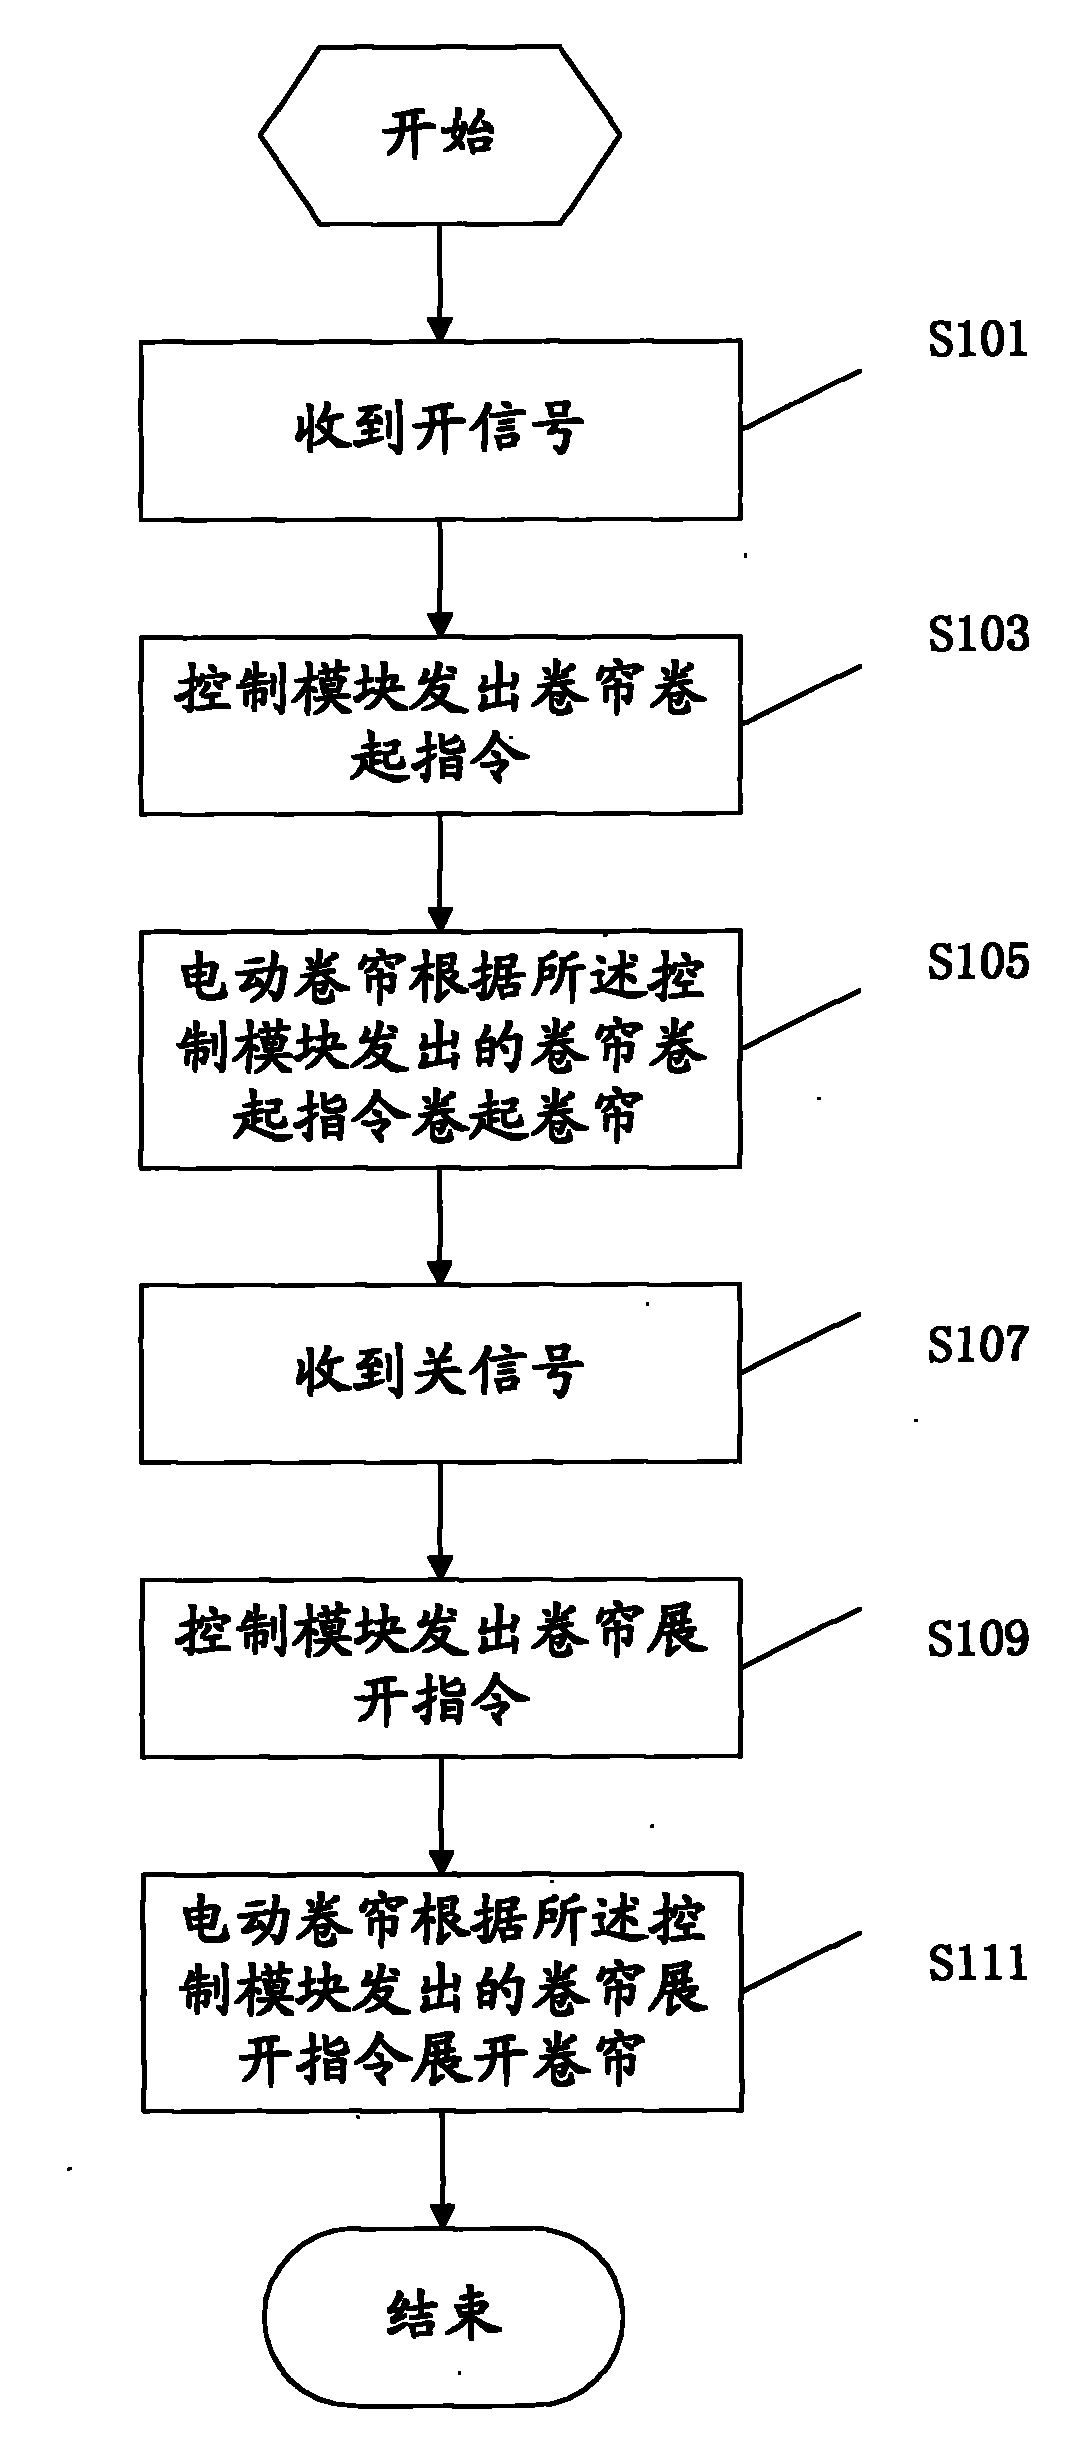 Method and device for controlling roller shutter for display screen